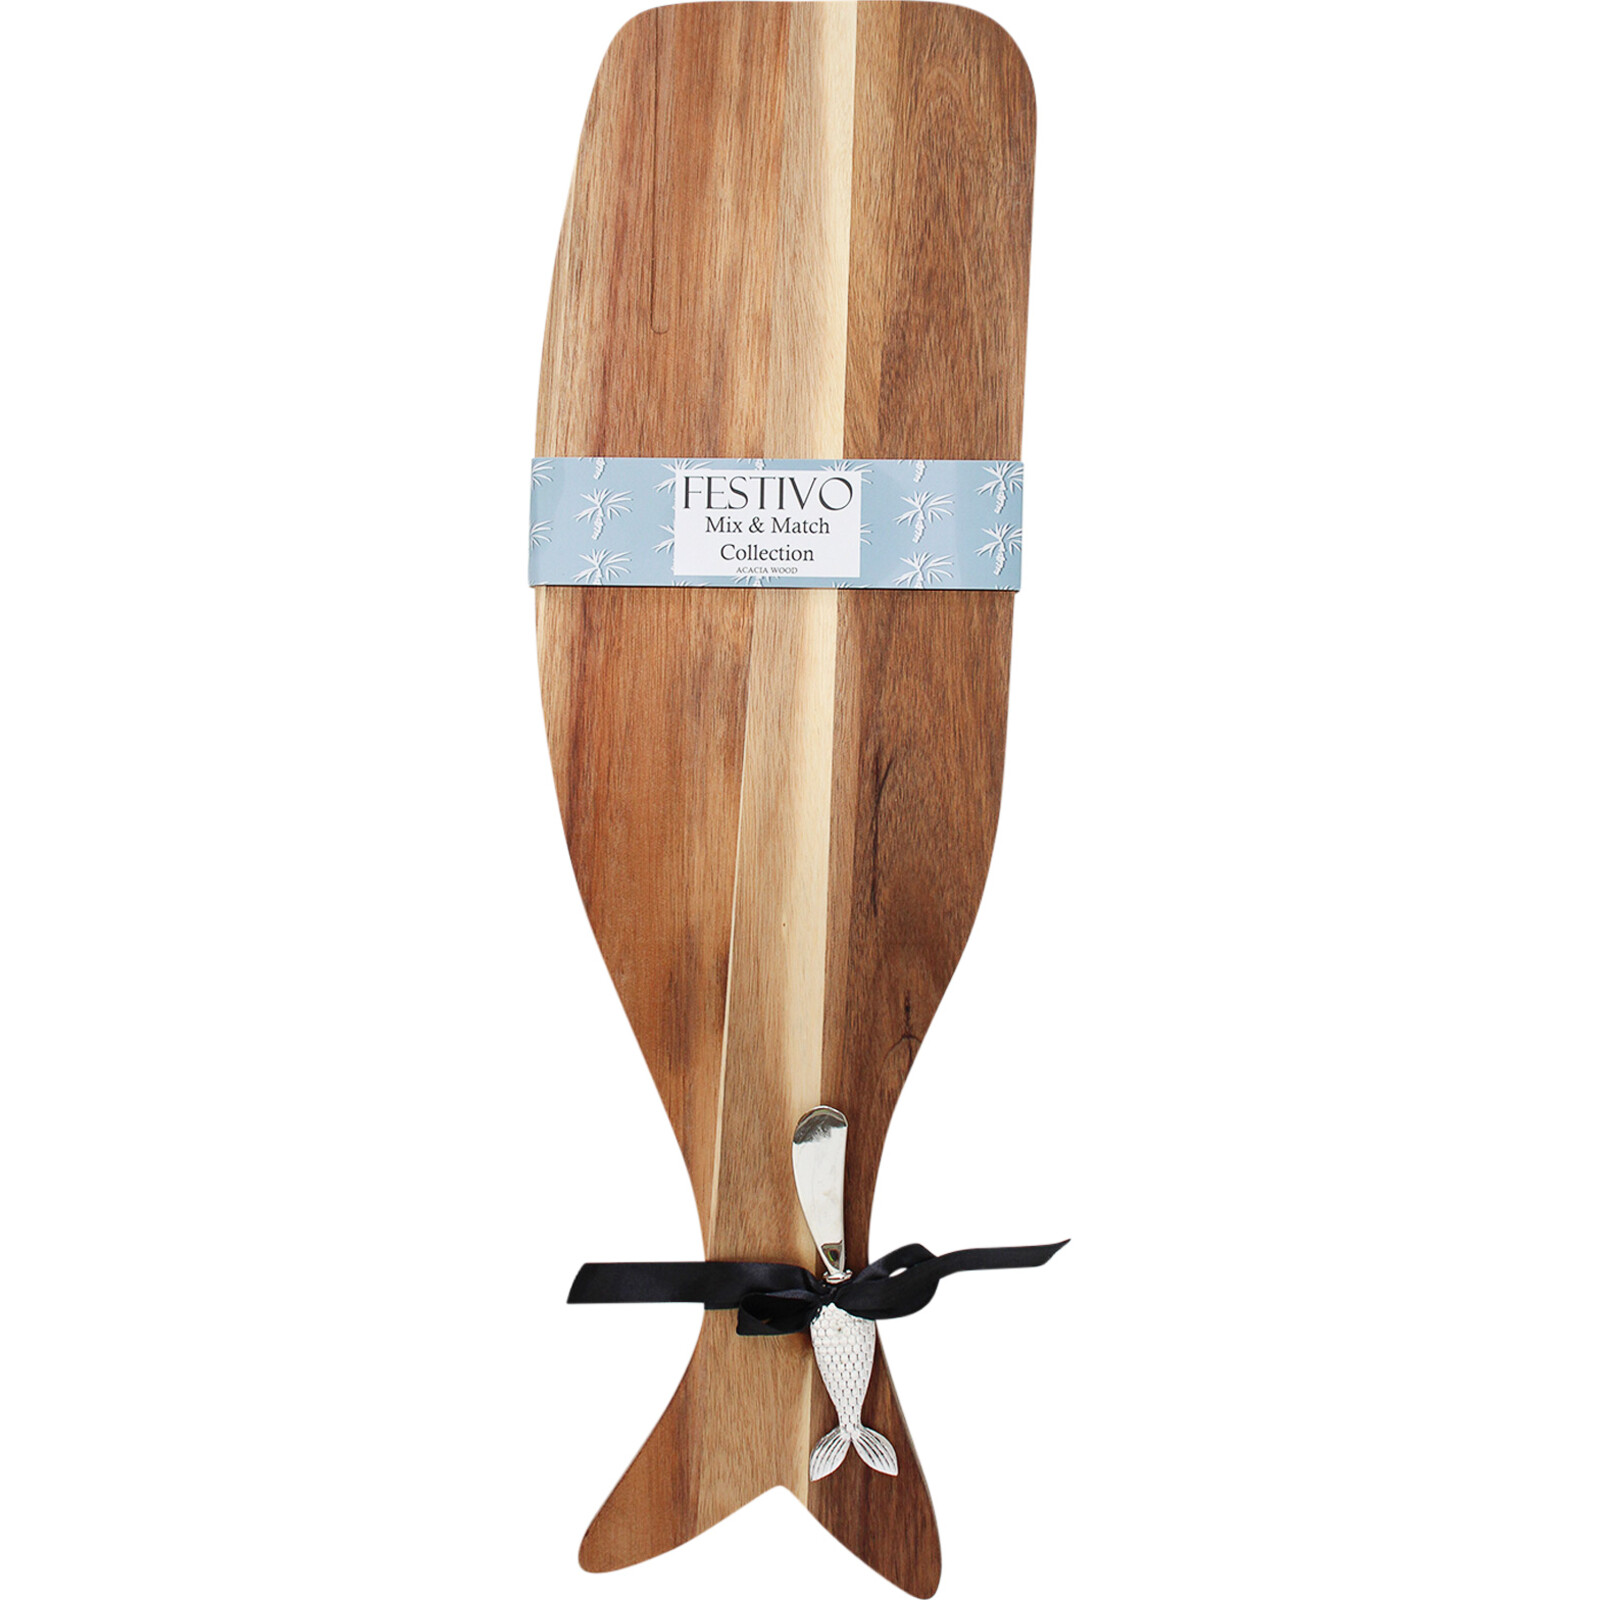 Whale Serving board with Spreader